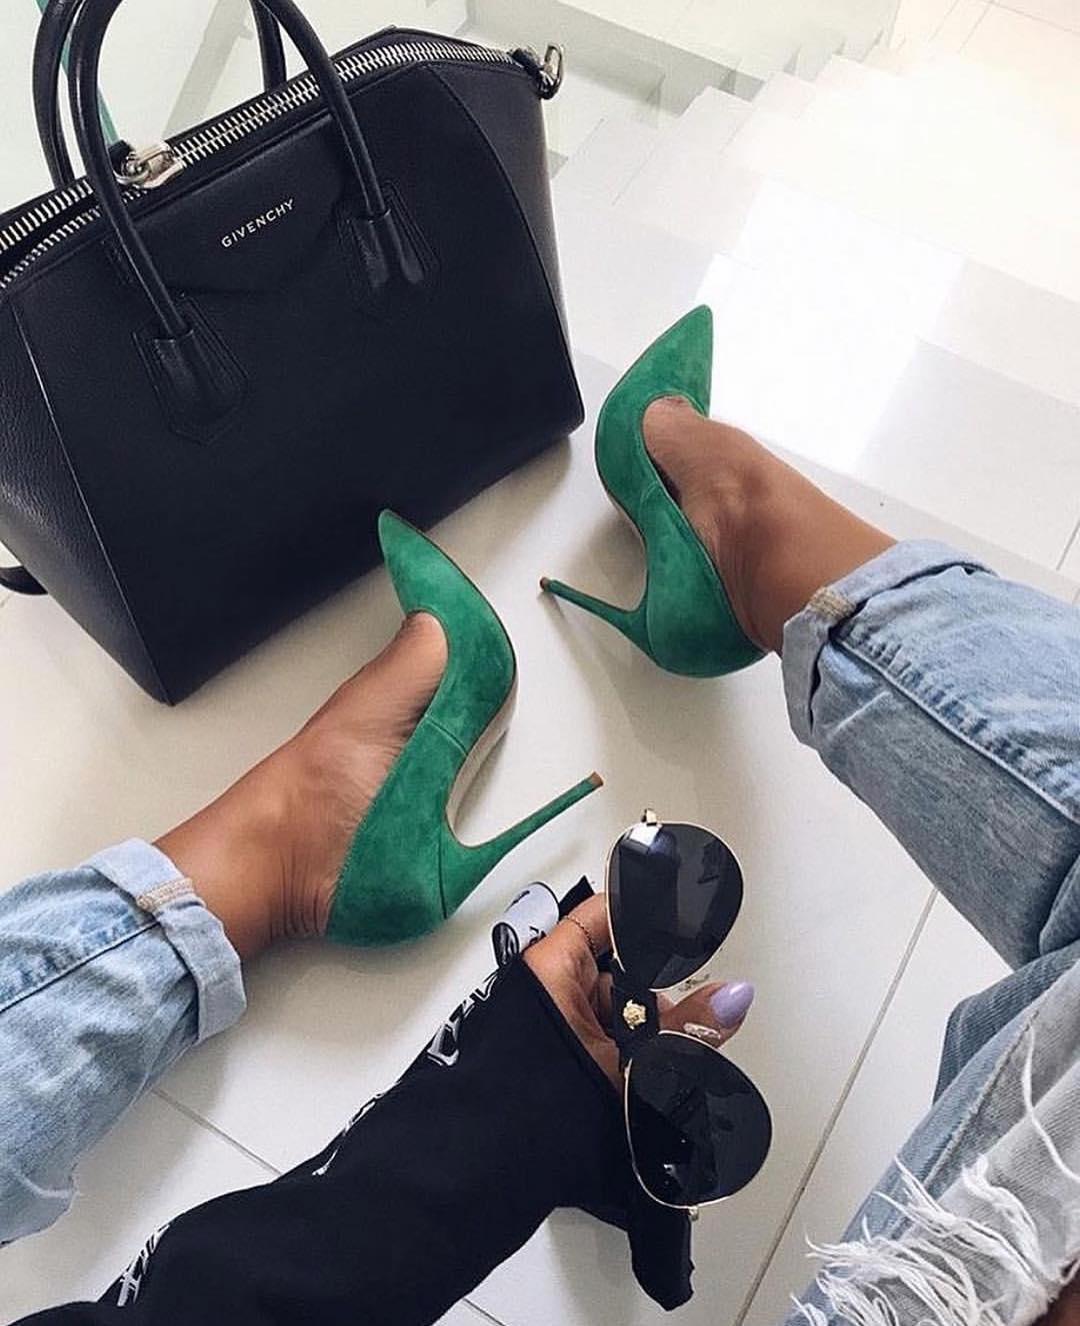 Make them green with envy: 